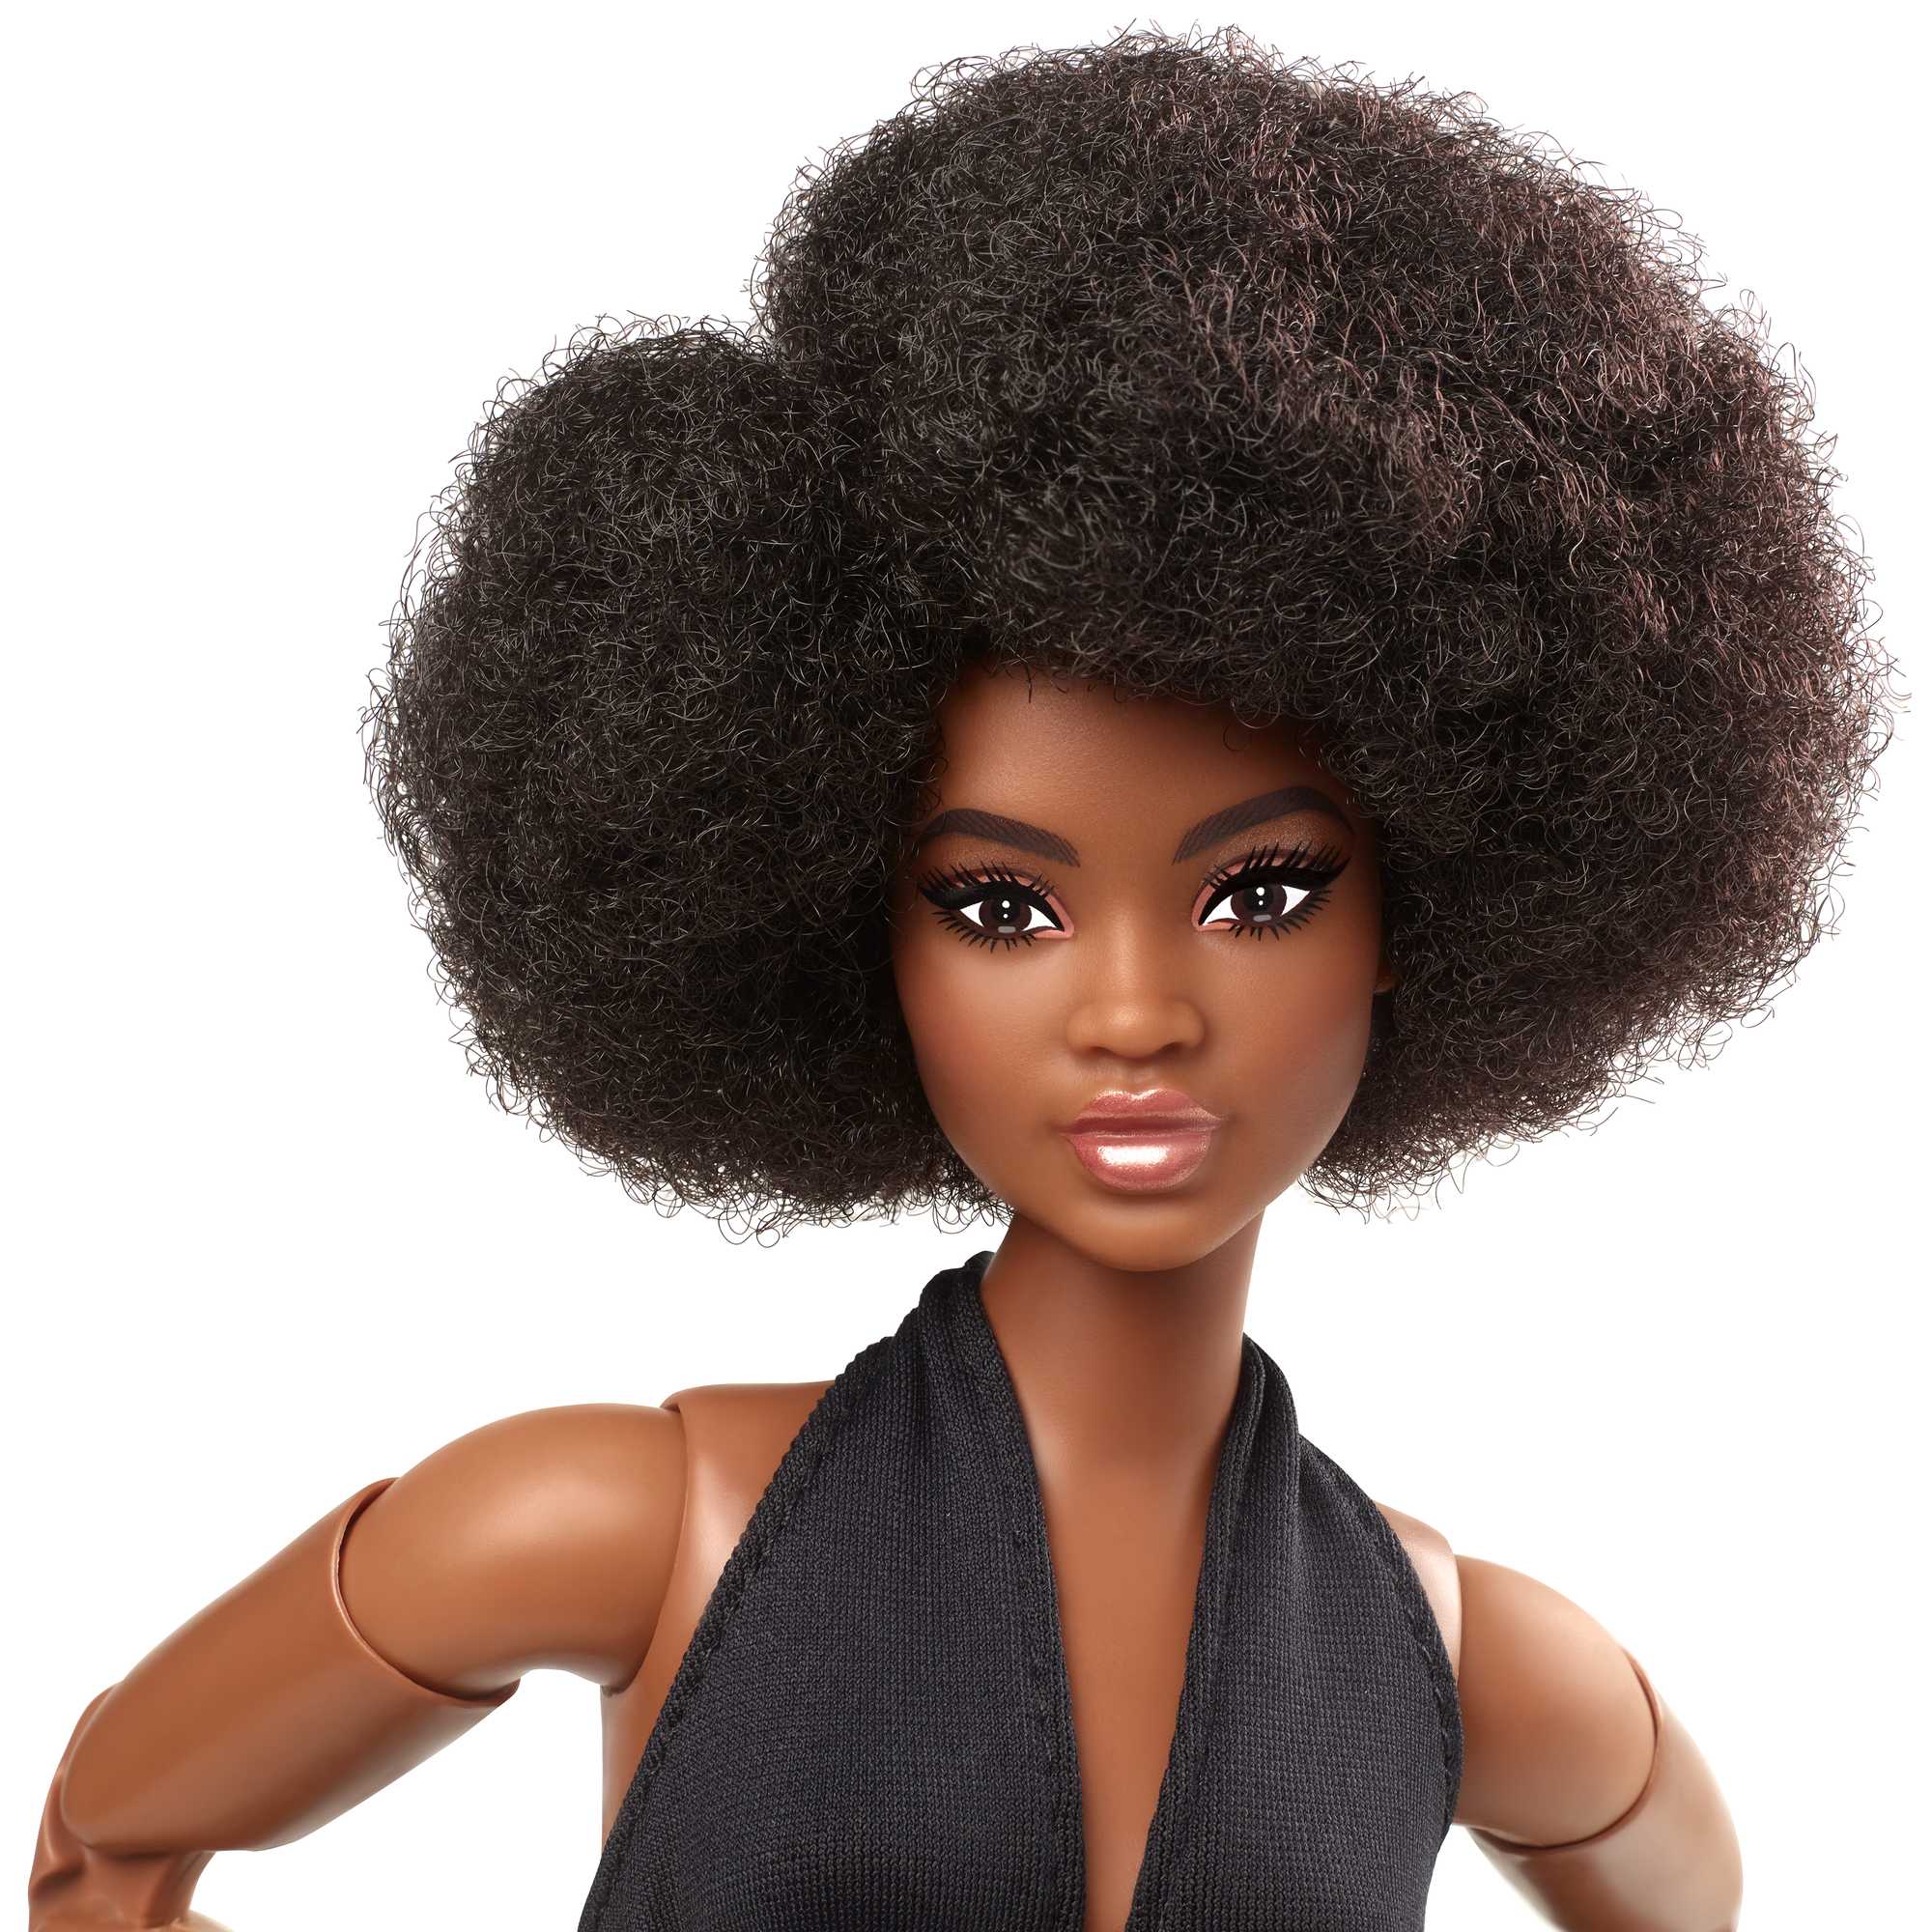 Barbie Signature Barbie Looks Doll (Brunette Wavy Hair, Curvy Body Type),  Fully Posable Fashion Doll, For Collectors - The Black Toy Store